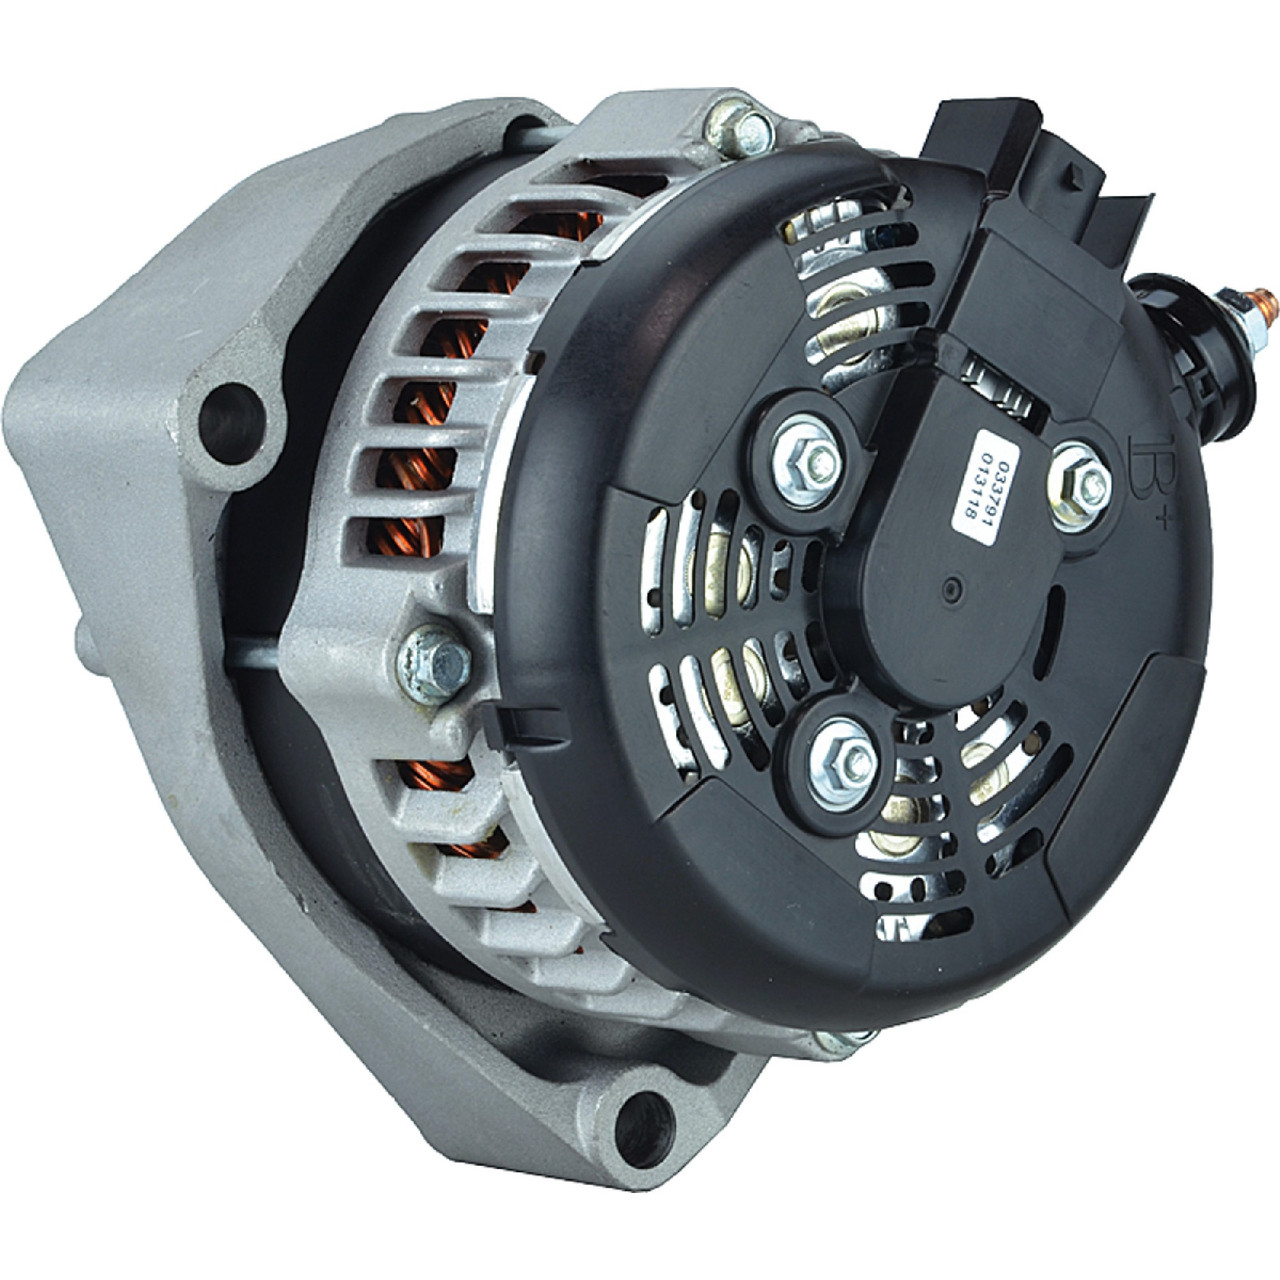 Get A Wholesale 10kw alternator For Emergency Purposes 